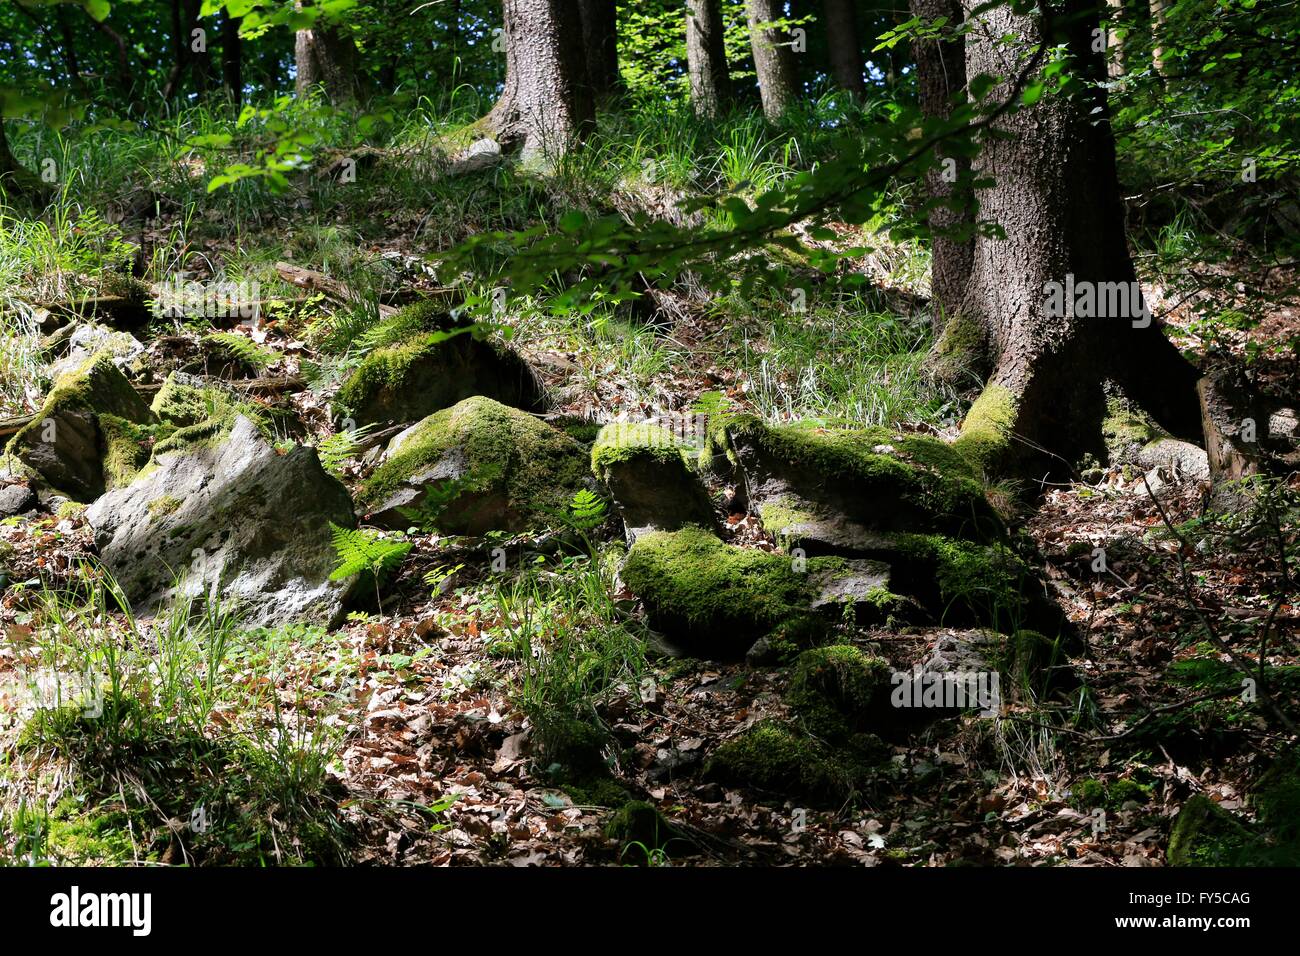 Moss on a rock. Moose are often found in mountain forests and moors. They have an important ecological role in the nutrient cycle, as they filter the nutrients from the precipitation. Brotterode, Germany Date: June 14, 2015 Stock Photo